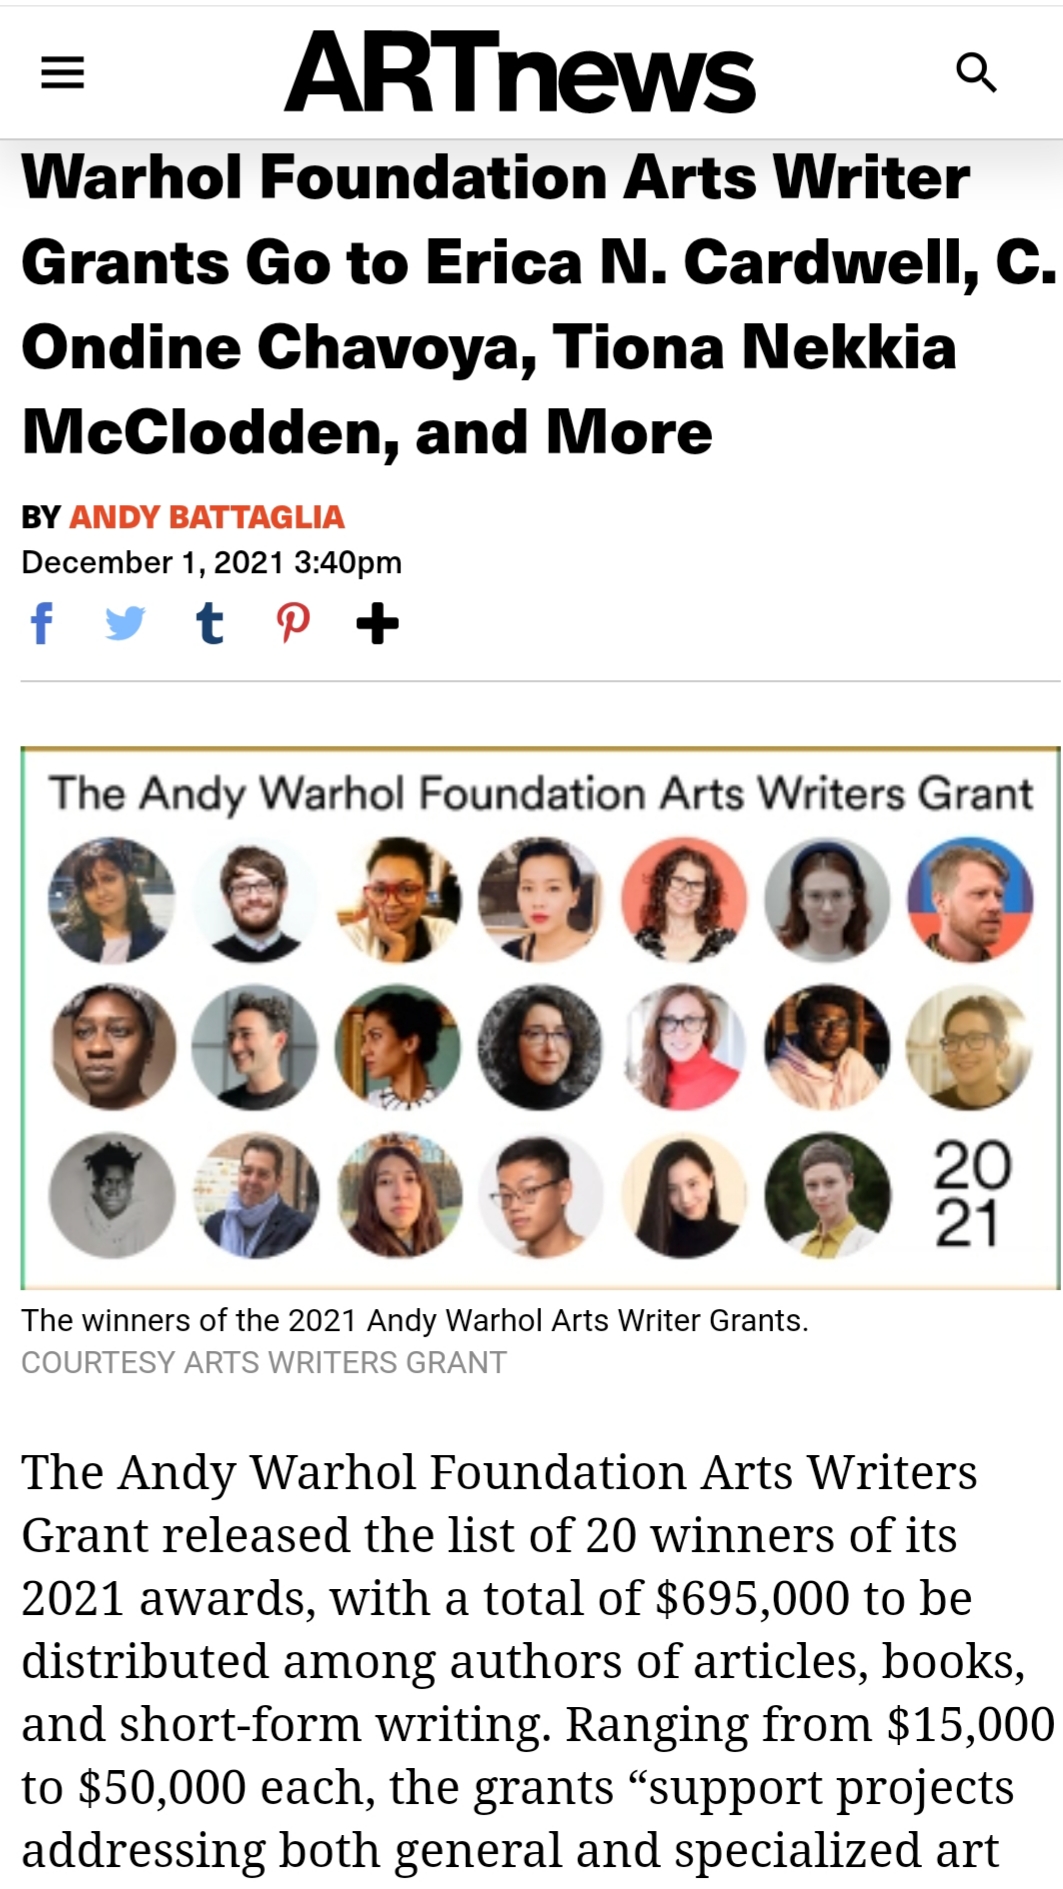 Screenshot of ARTnew's coverage of the 2021 Arts Writers Grant announcement